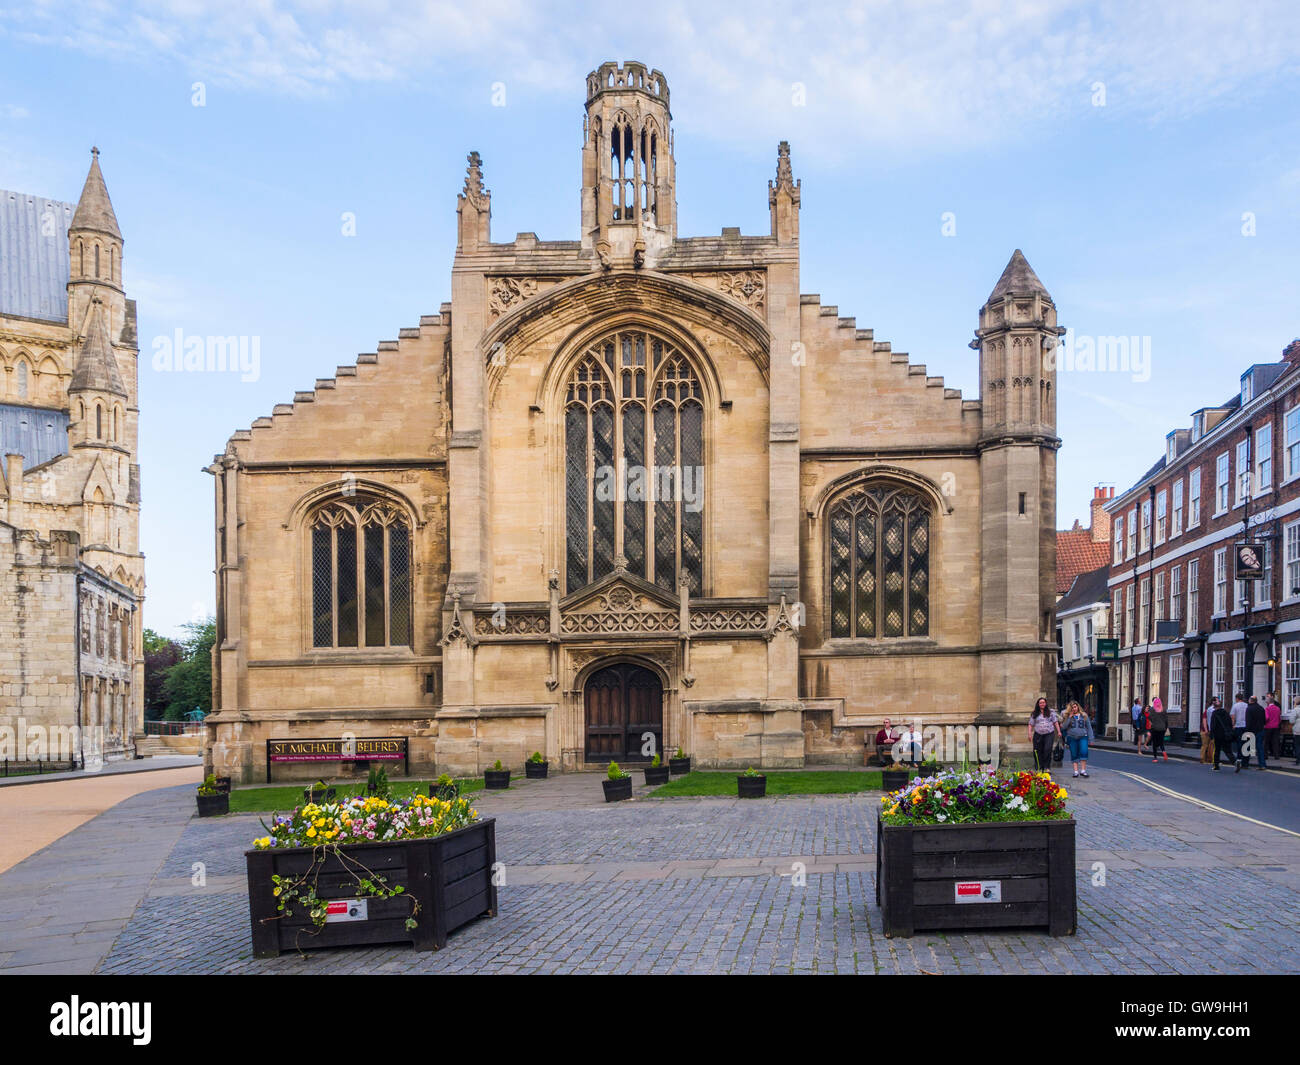 St Michael le Belfrey, built 1525 to 1537, an Anglican church in York, England, situated next to York Minster in the city centre Stock Photo